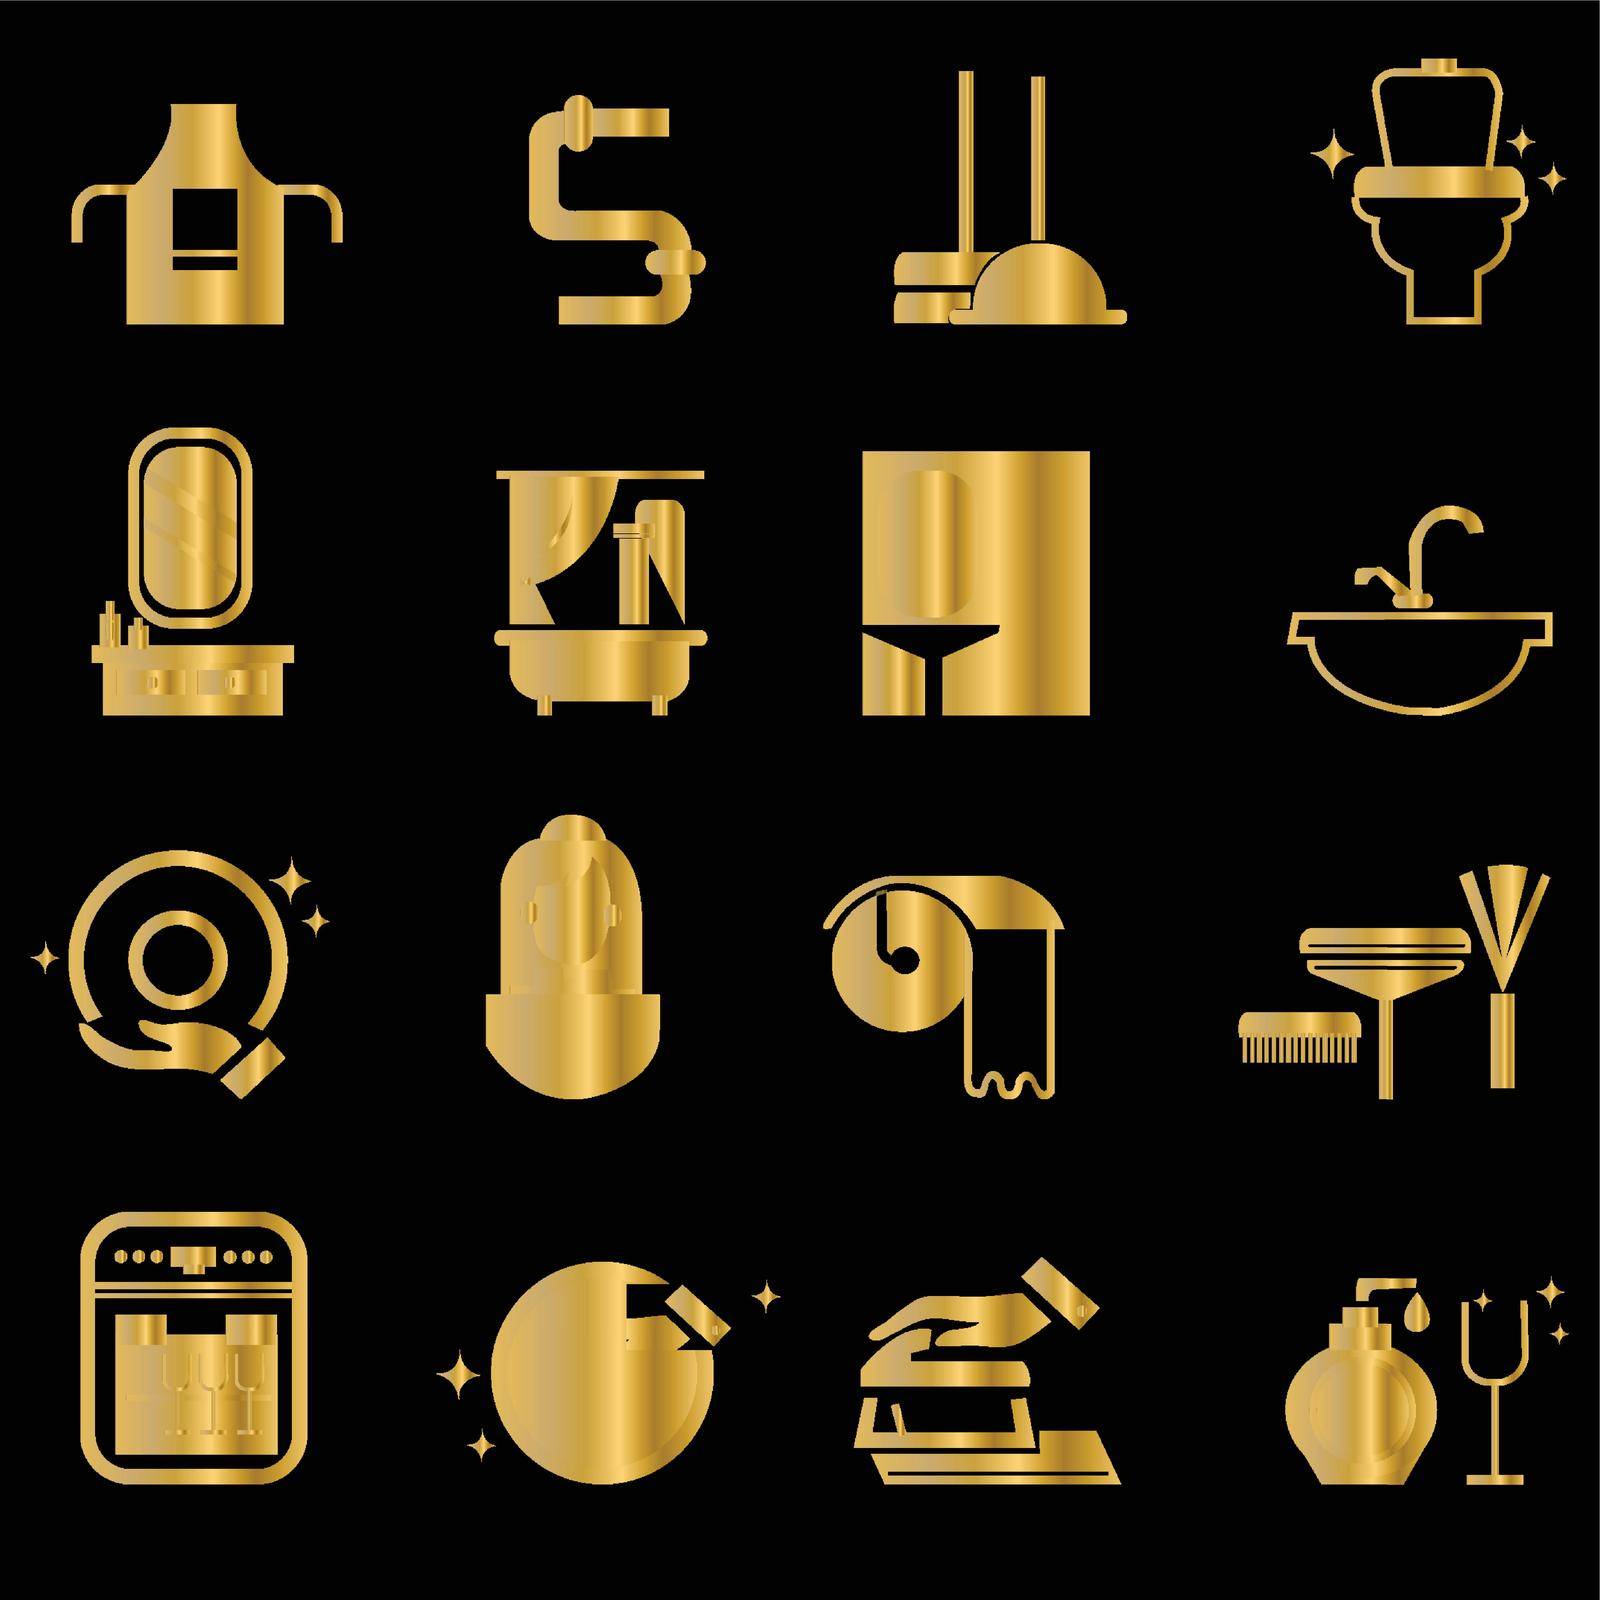 you can use Set of gold cleaning icons to design banners, posters, backgrounds, ...etc.